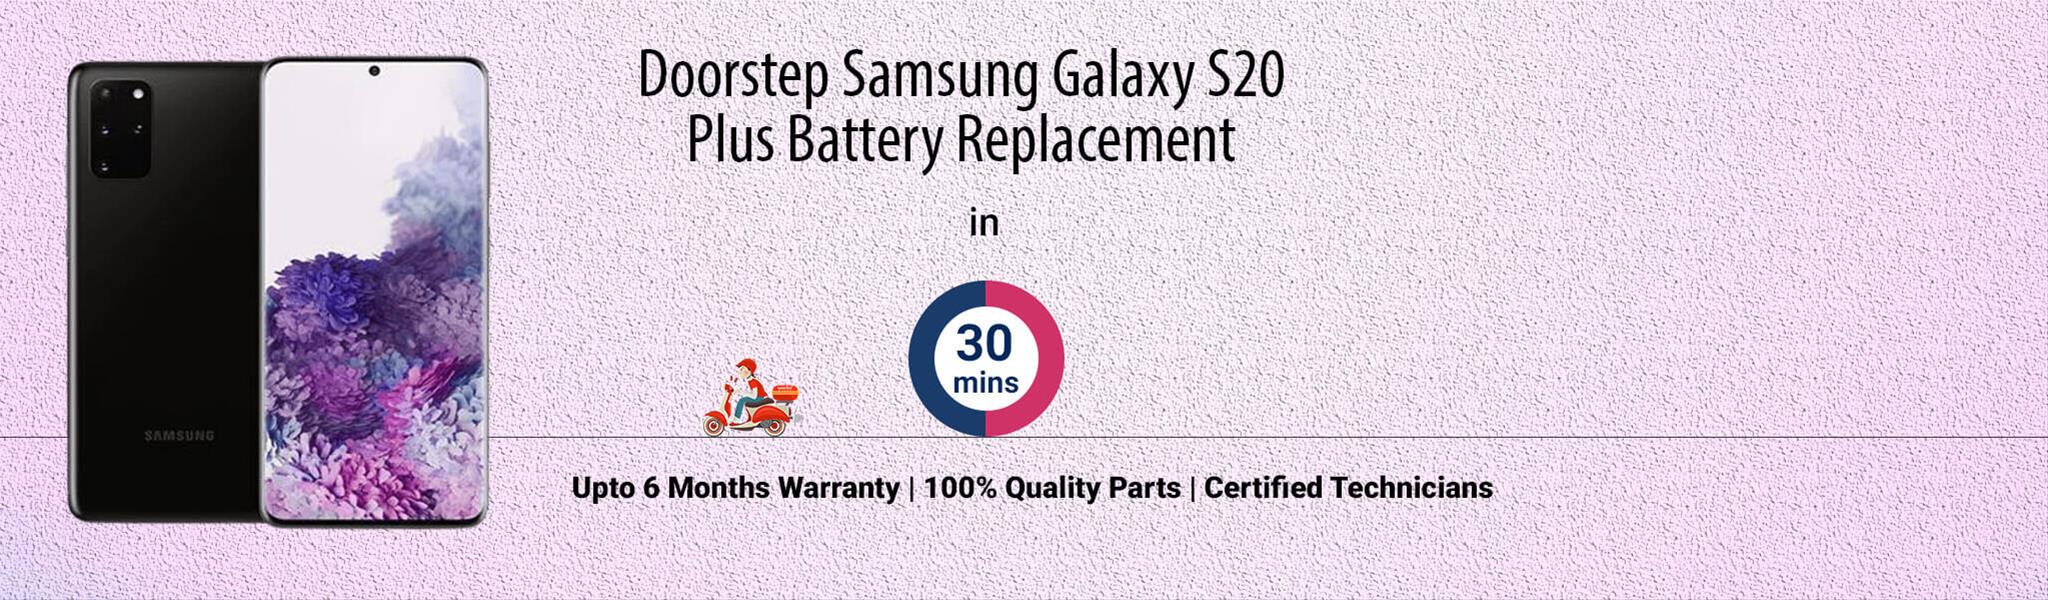 samsung-galaxy-s20-plus-battery-replacement.jpg